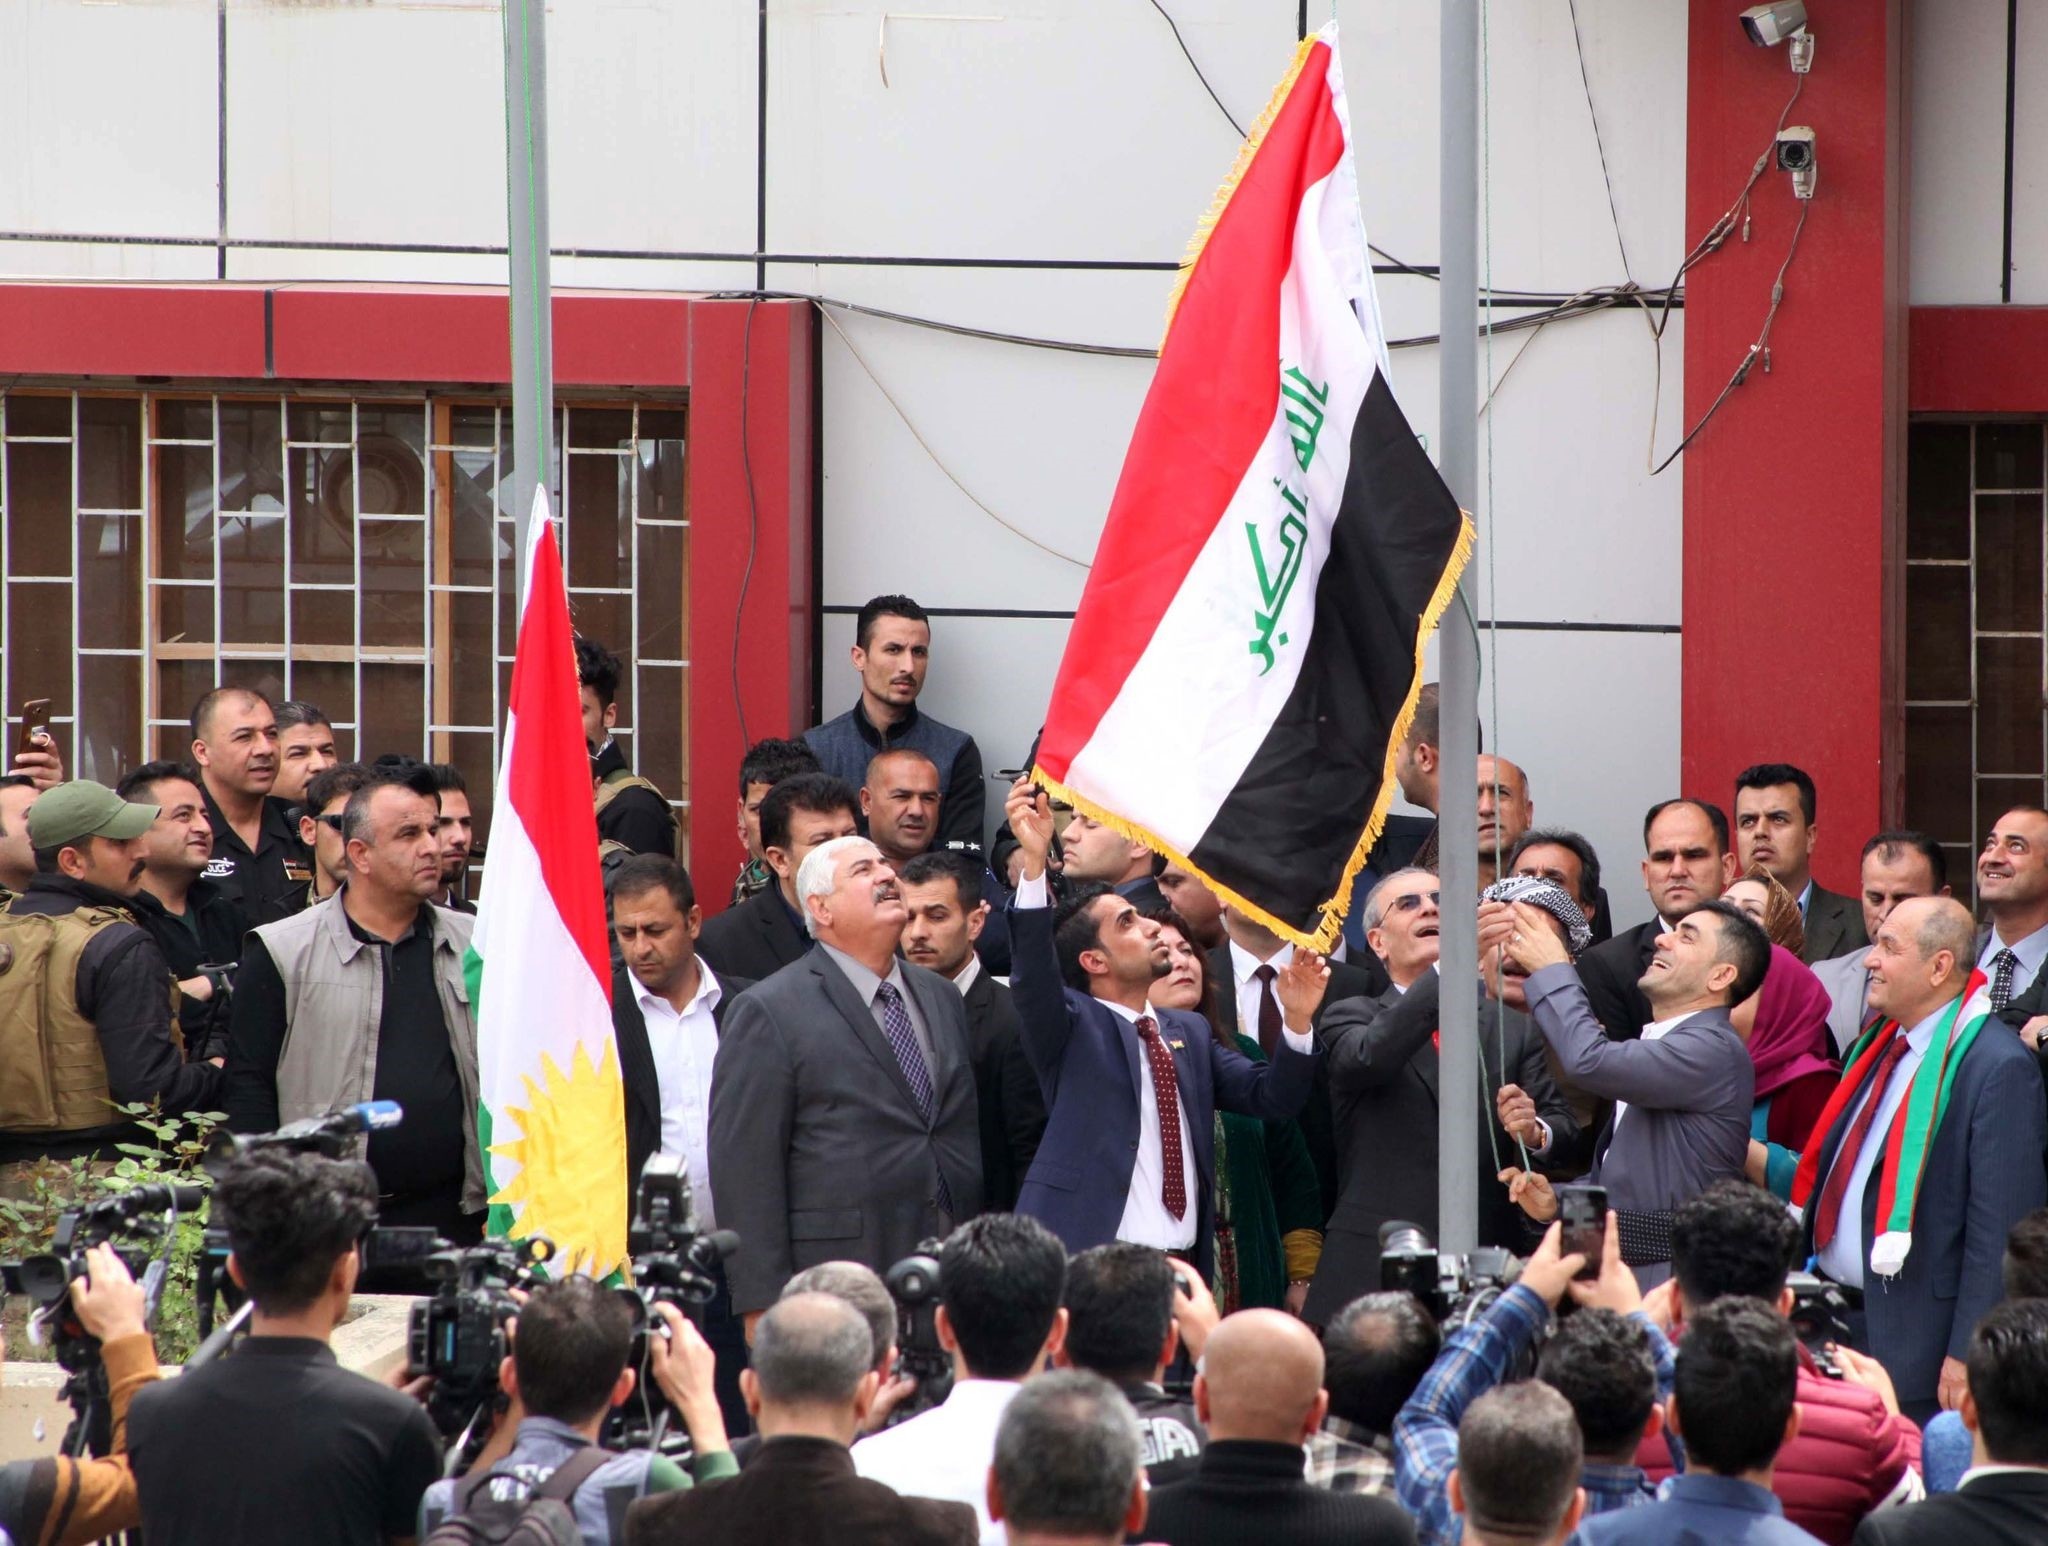 Kirkuk provincial governor raises the Iraqi flag to fly next to the Kurdish flag over a government building in Kirkuk on March 28, 2017. (AFP PHOTO)